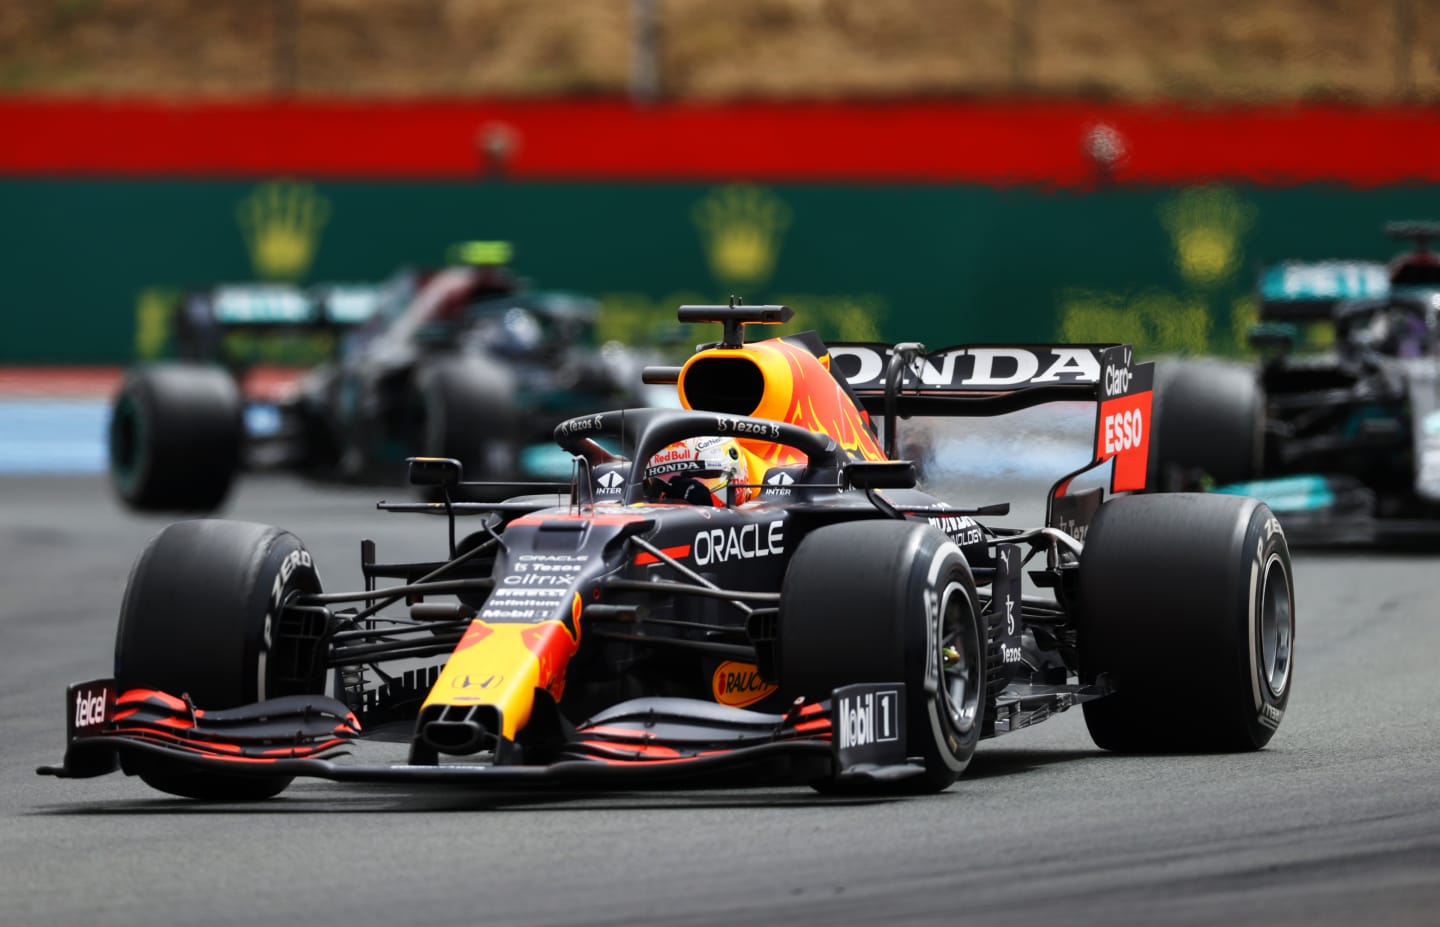 LE CASTELLET, FRANCE - JUNE 20: Max Verstappen of the Netherlands driving the (33) Red Bull Racing